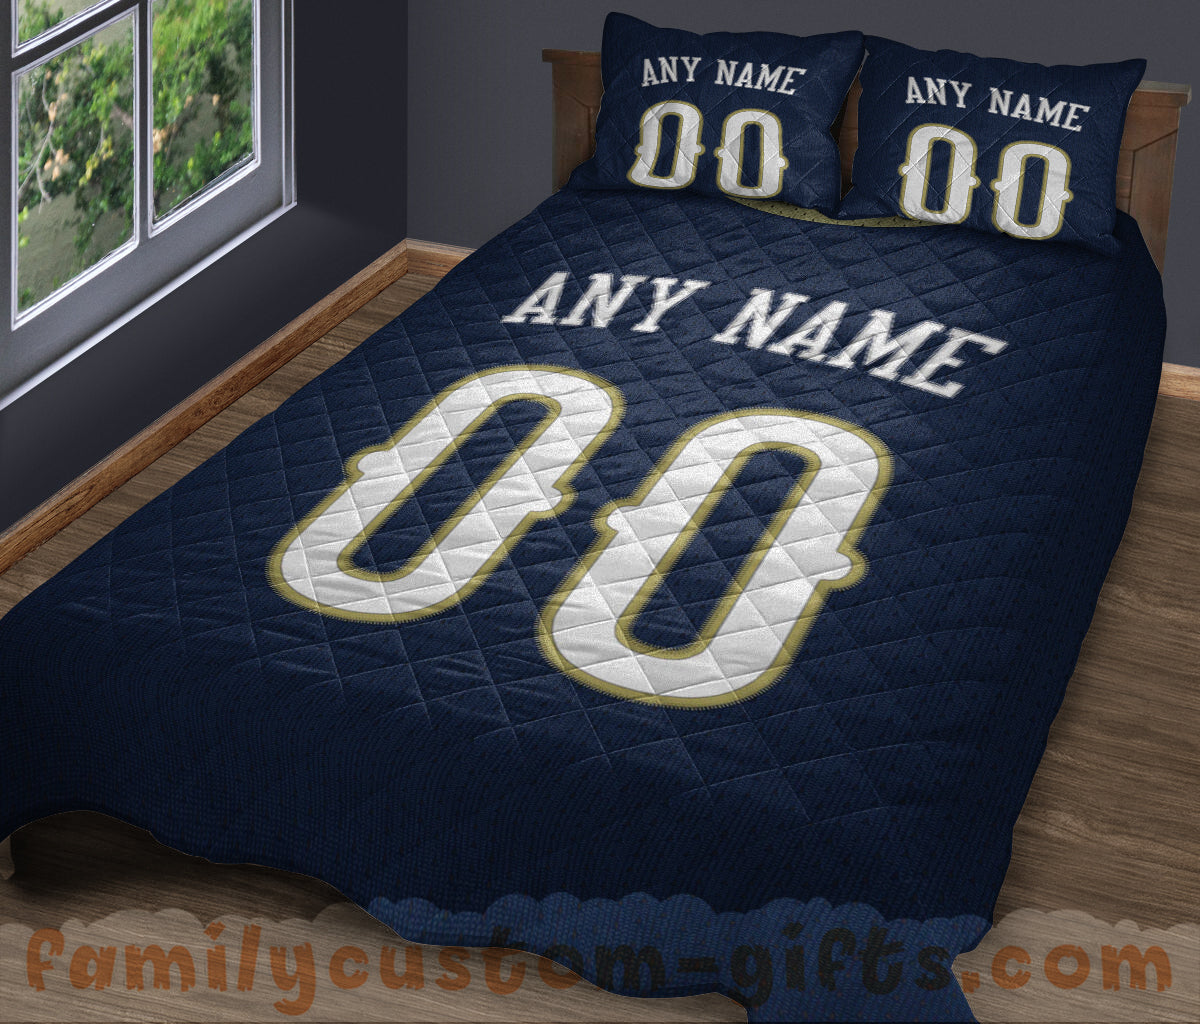 Custom Quilt Sets New Orleans Jersey Personalized Basketball Premium Quilt Bedding for Men Women